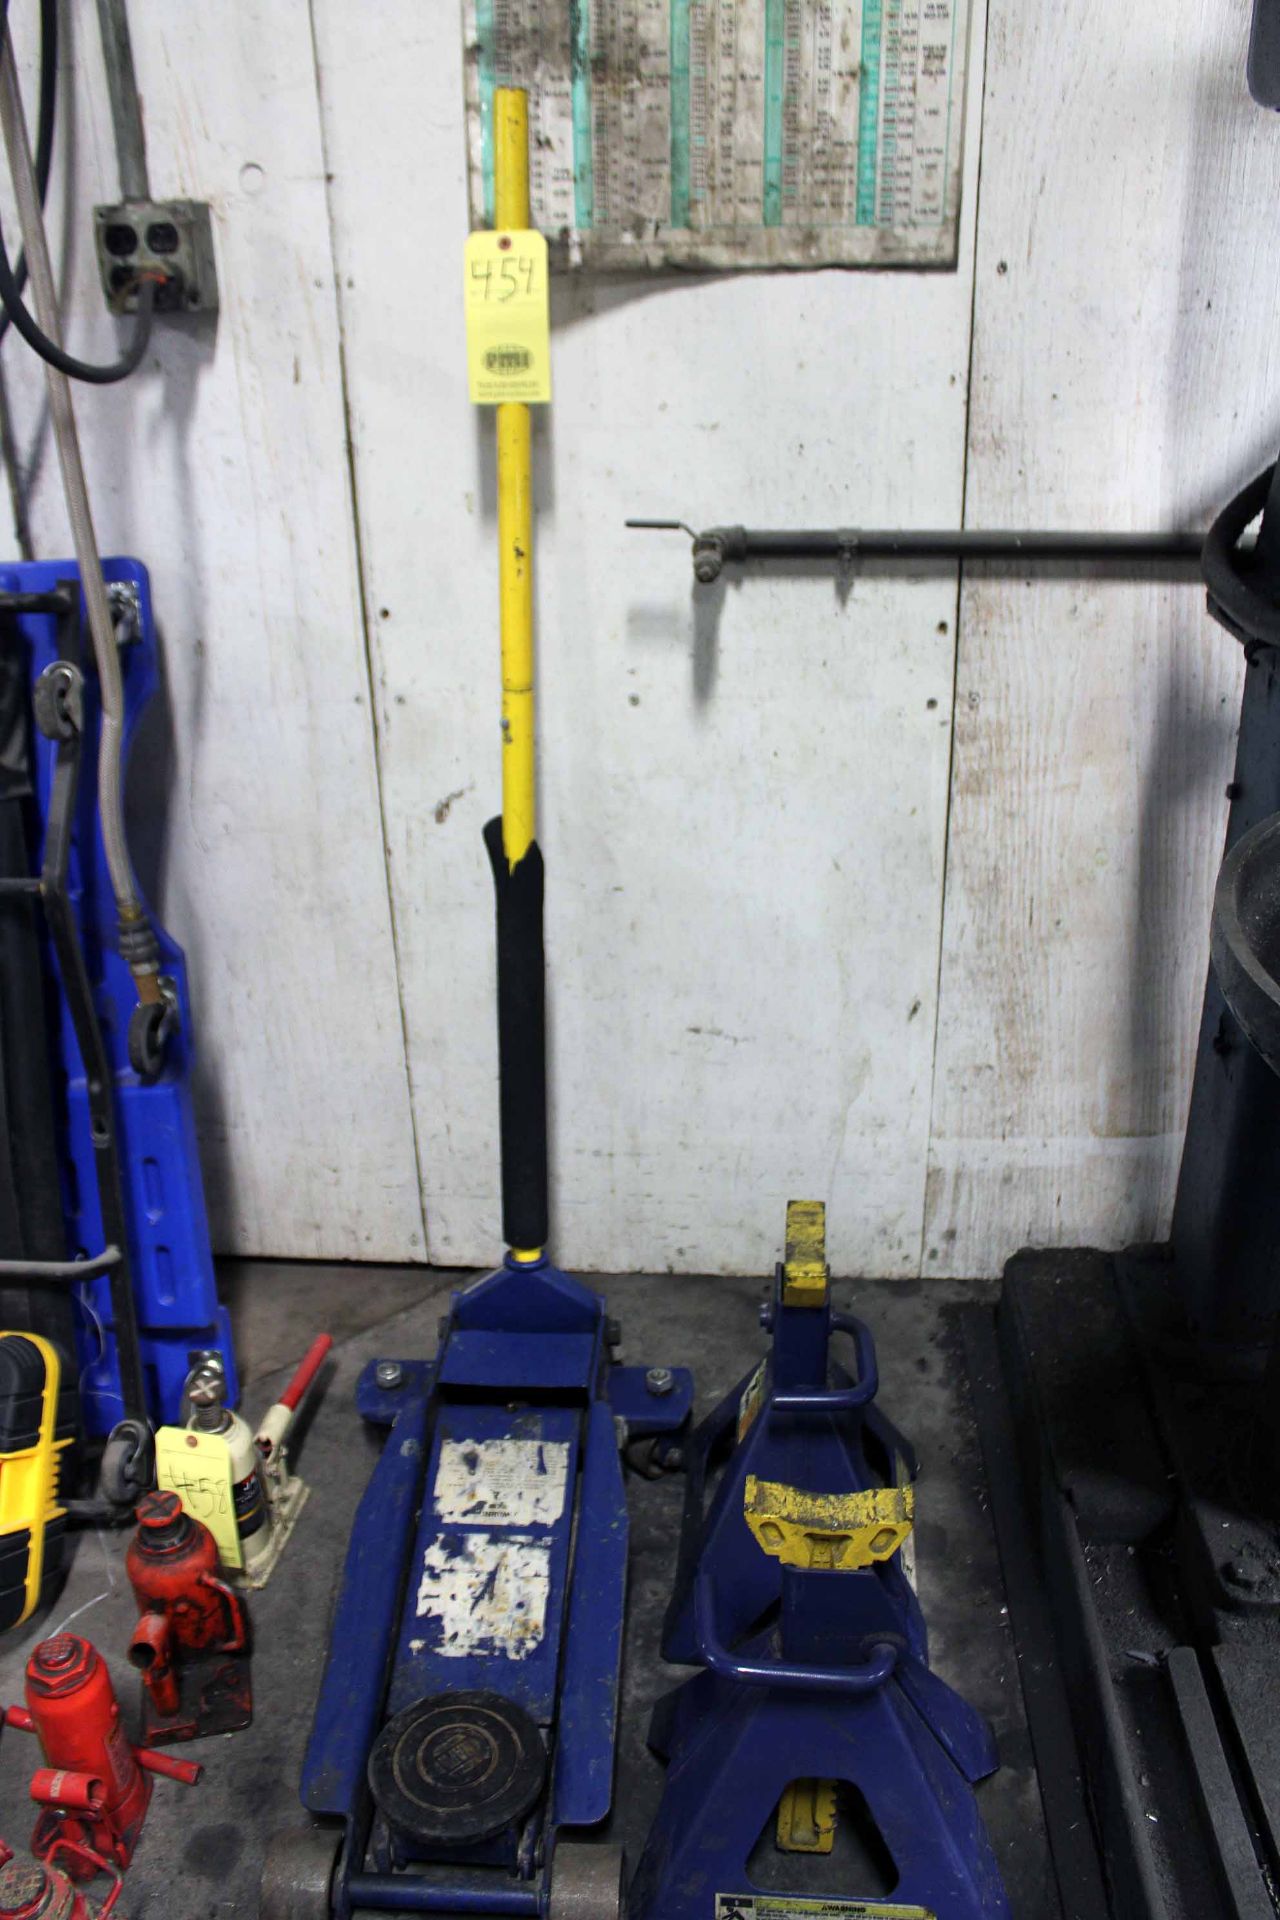 LOT CONSISTING OF: (1) 3-1/2 T. service jack & (2) 7 T. jack stands